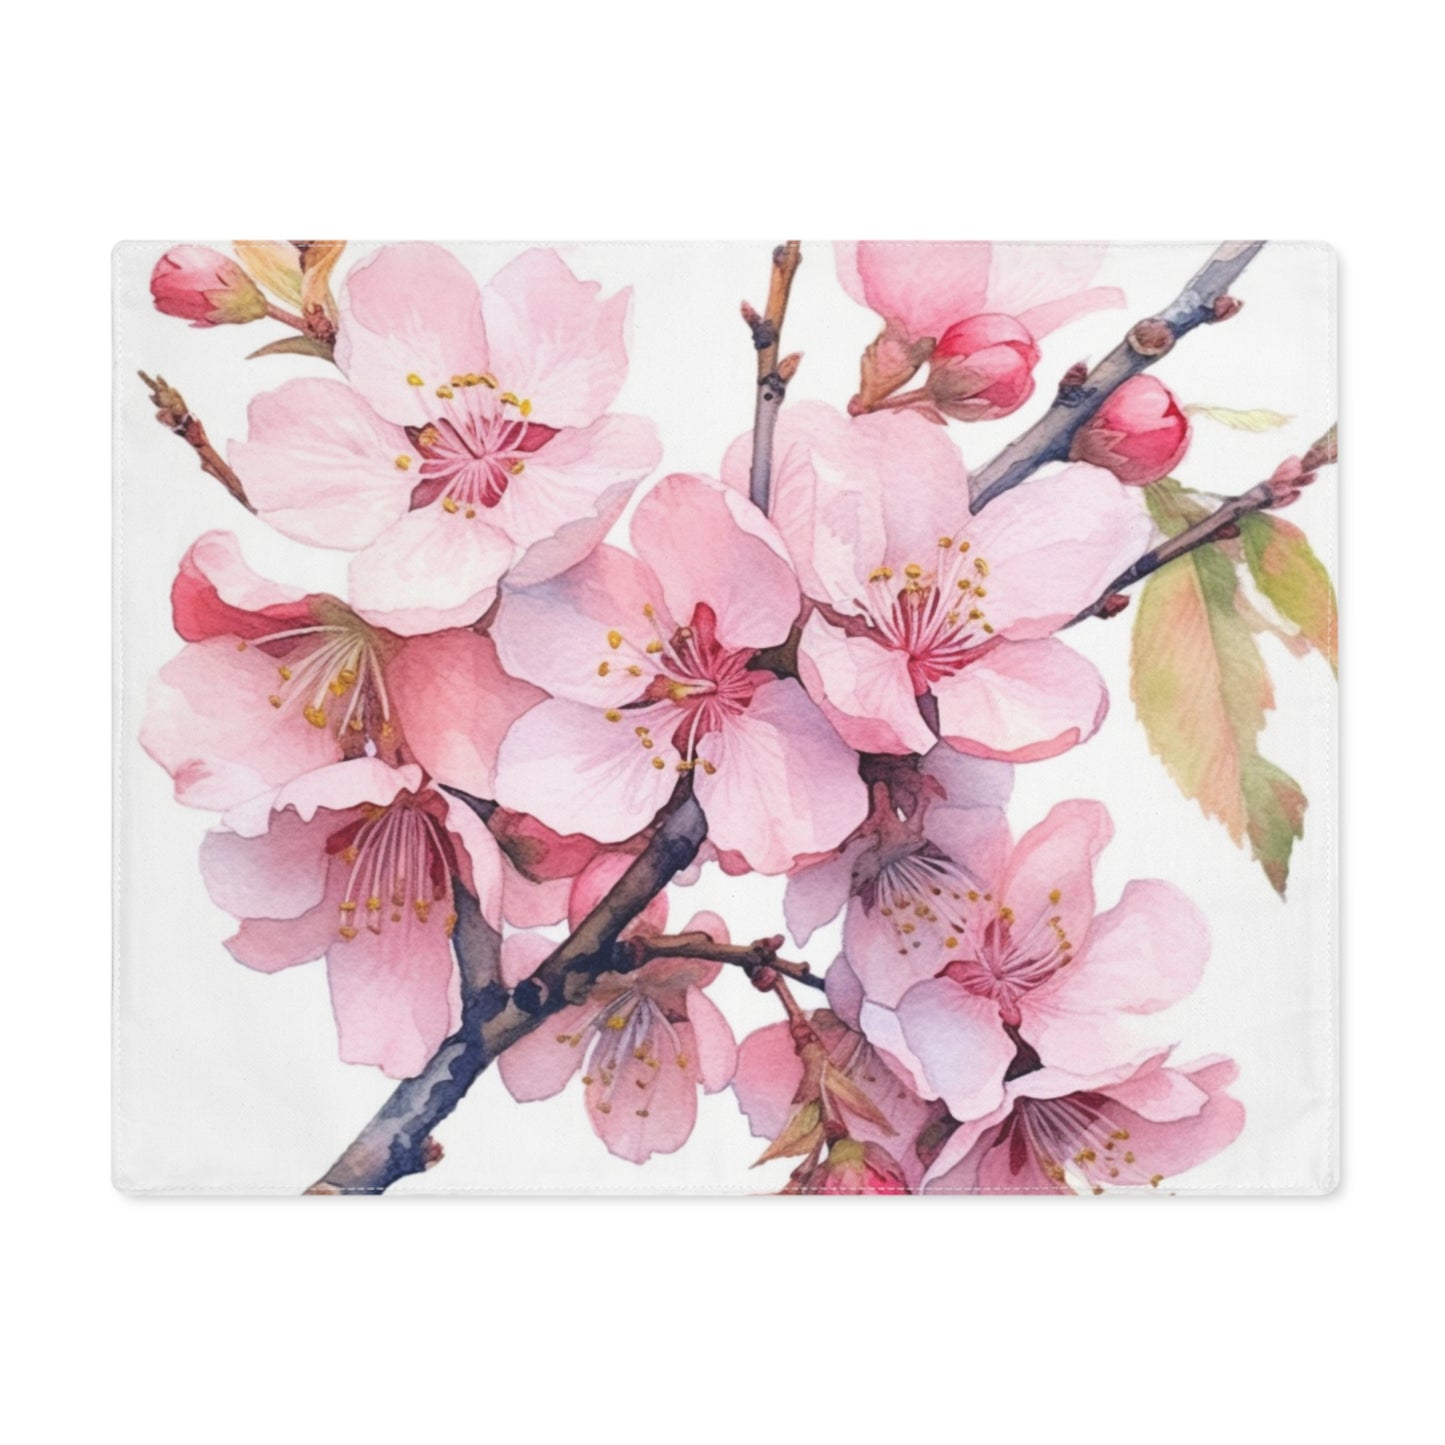 Whimsical Delight: Watercolor Cherry Blossom Tree Placemat